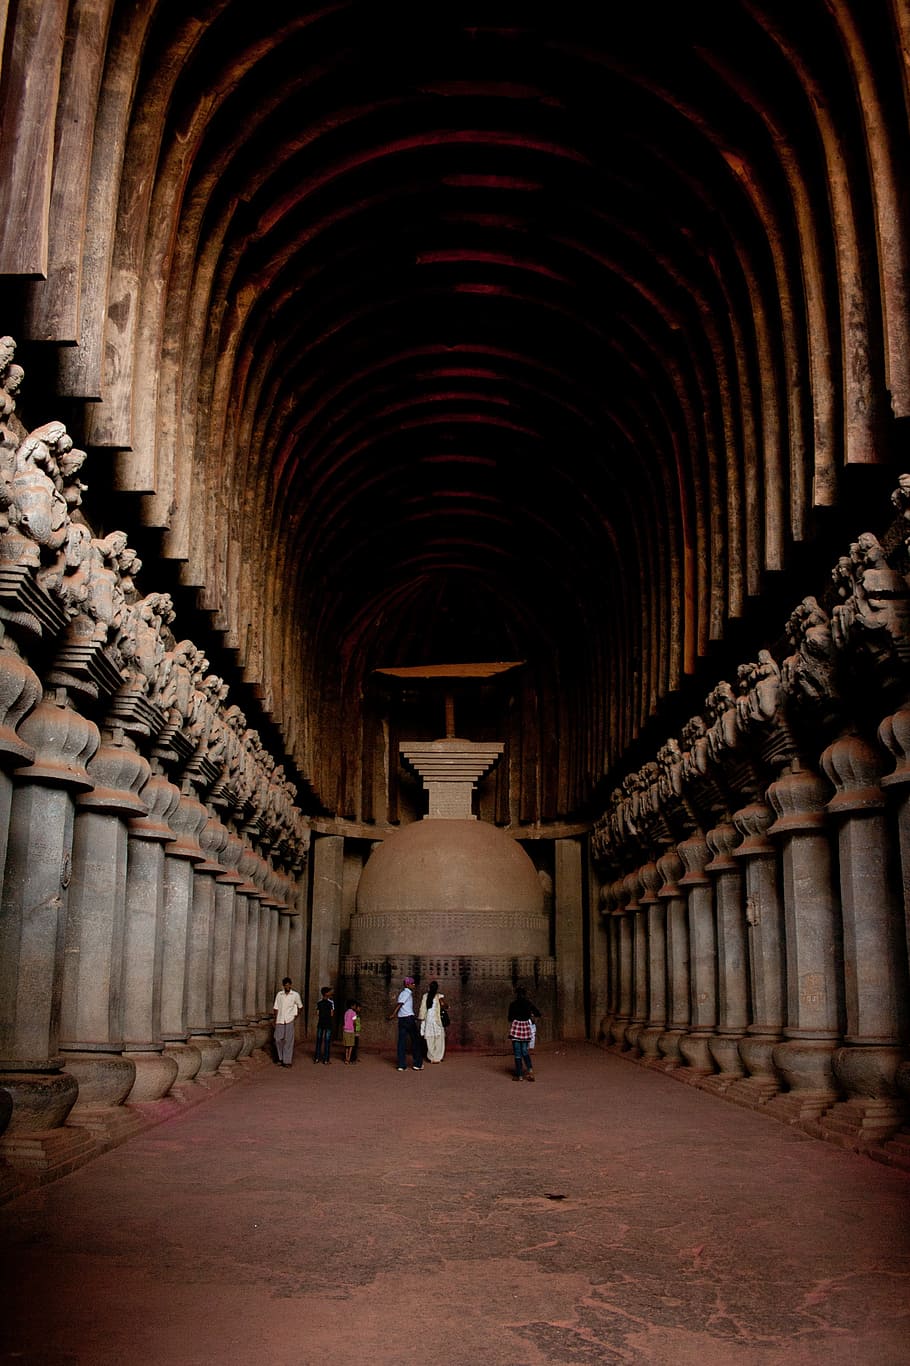 karla caves, india, buddhism, caves, stone carvings, indian, temple, architecture, built structure, arch